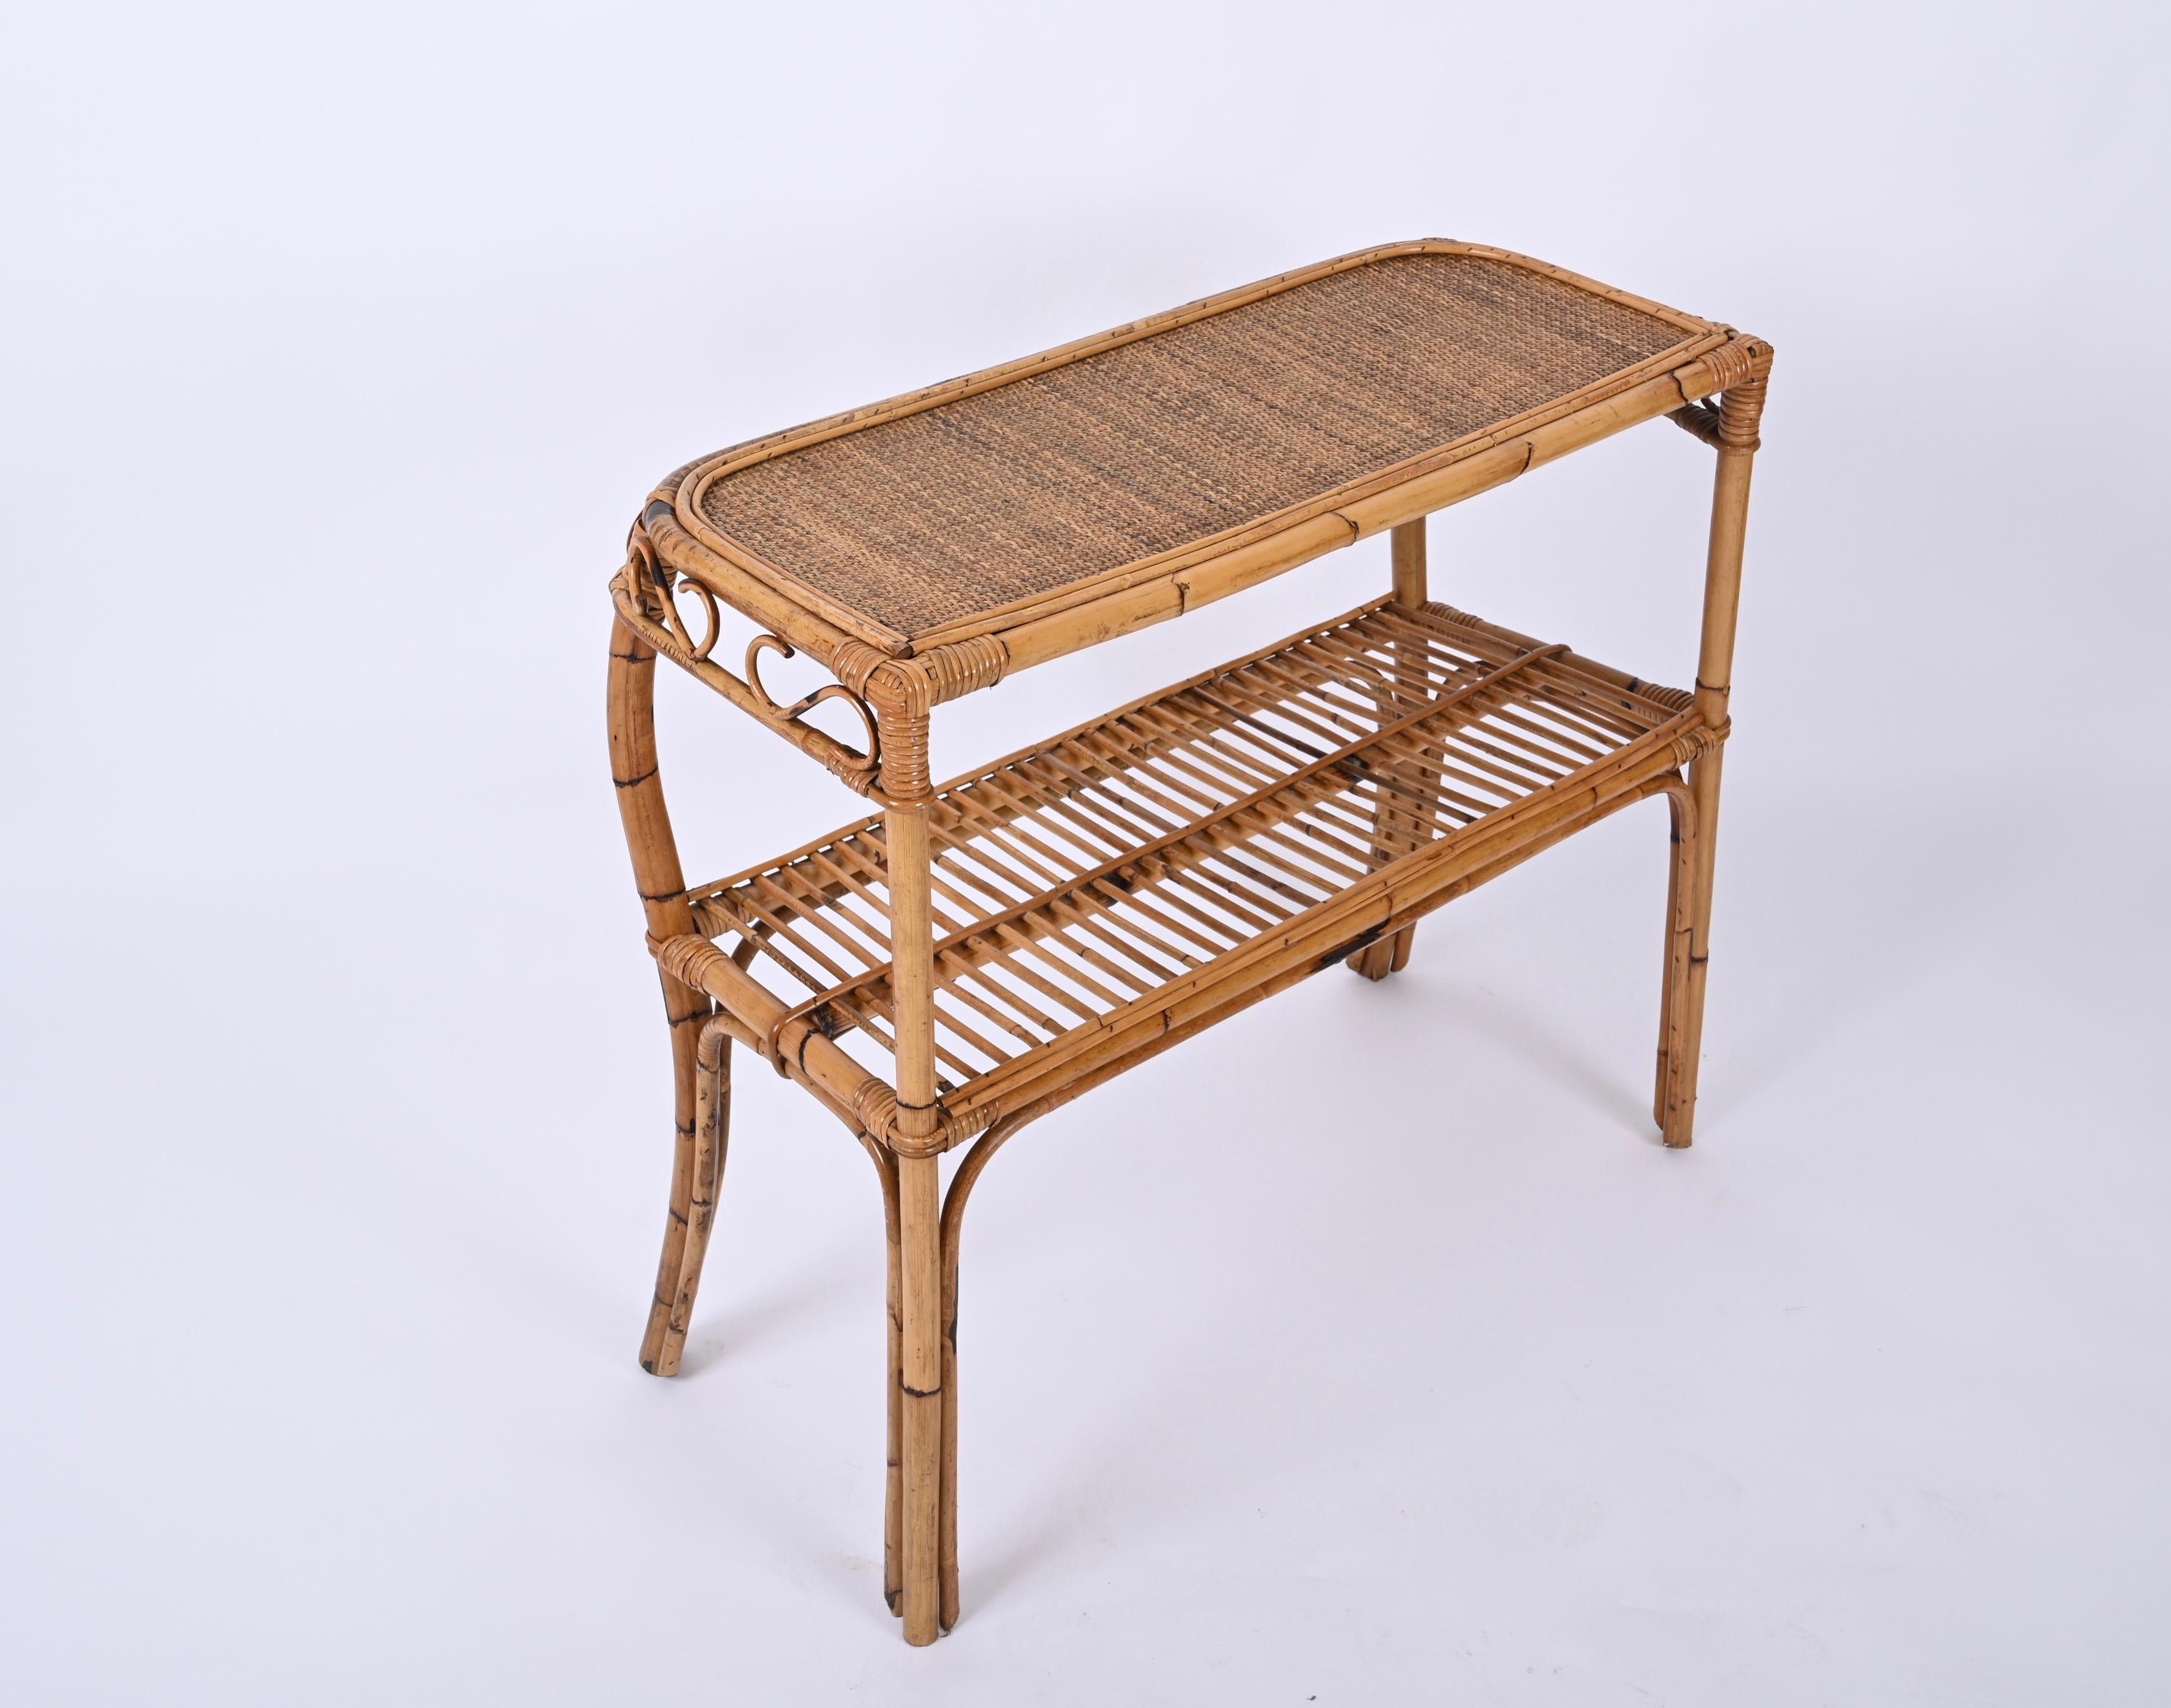 Midcentury Bamboo and Rattan Console Table, Franco Albini, Italy, 1960s For Sale 6